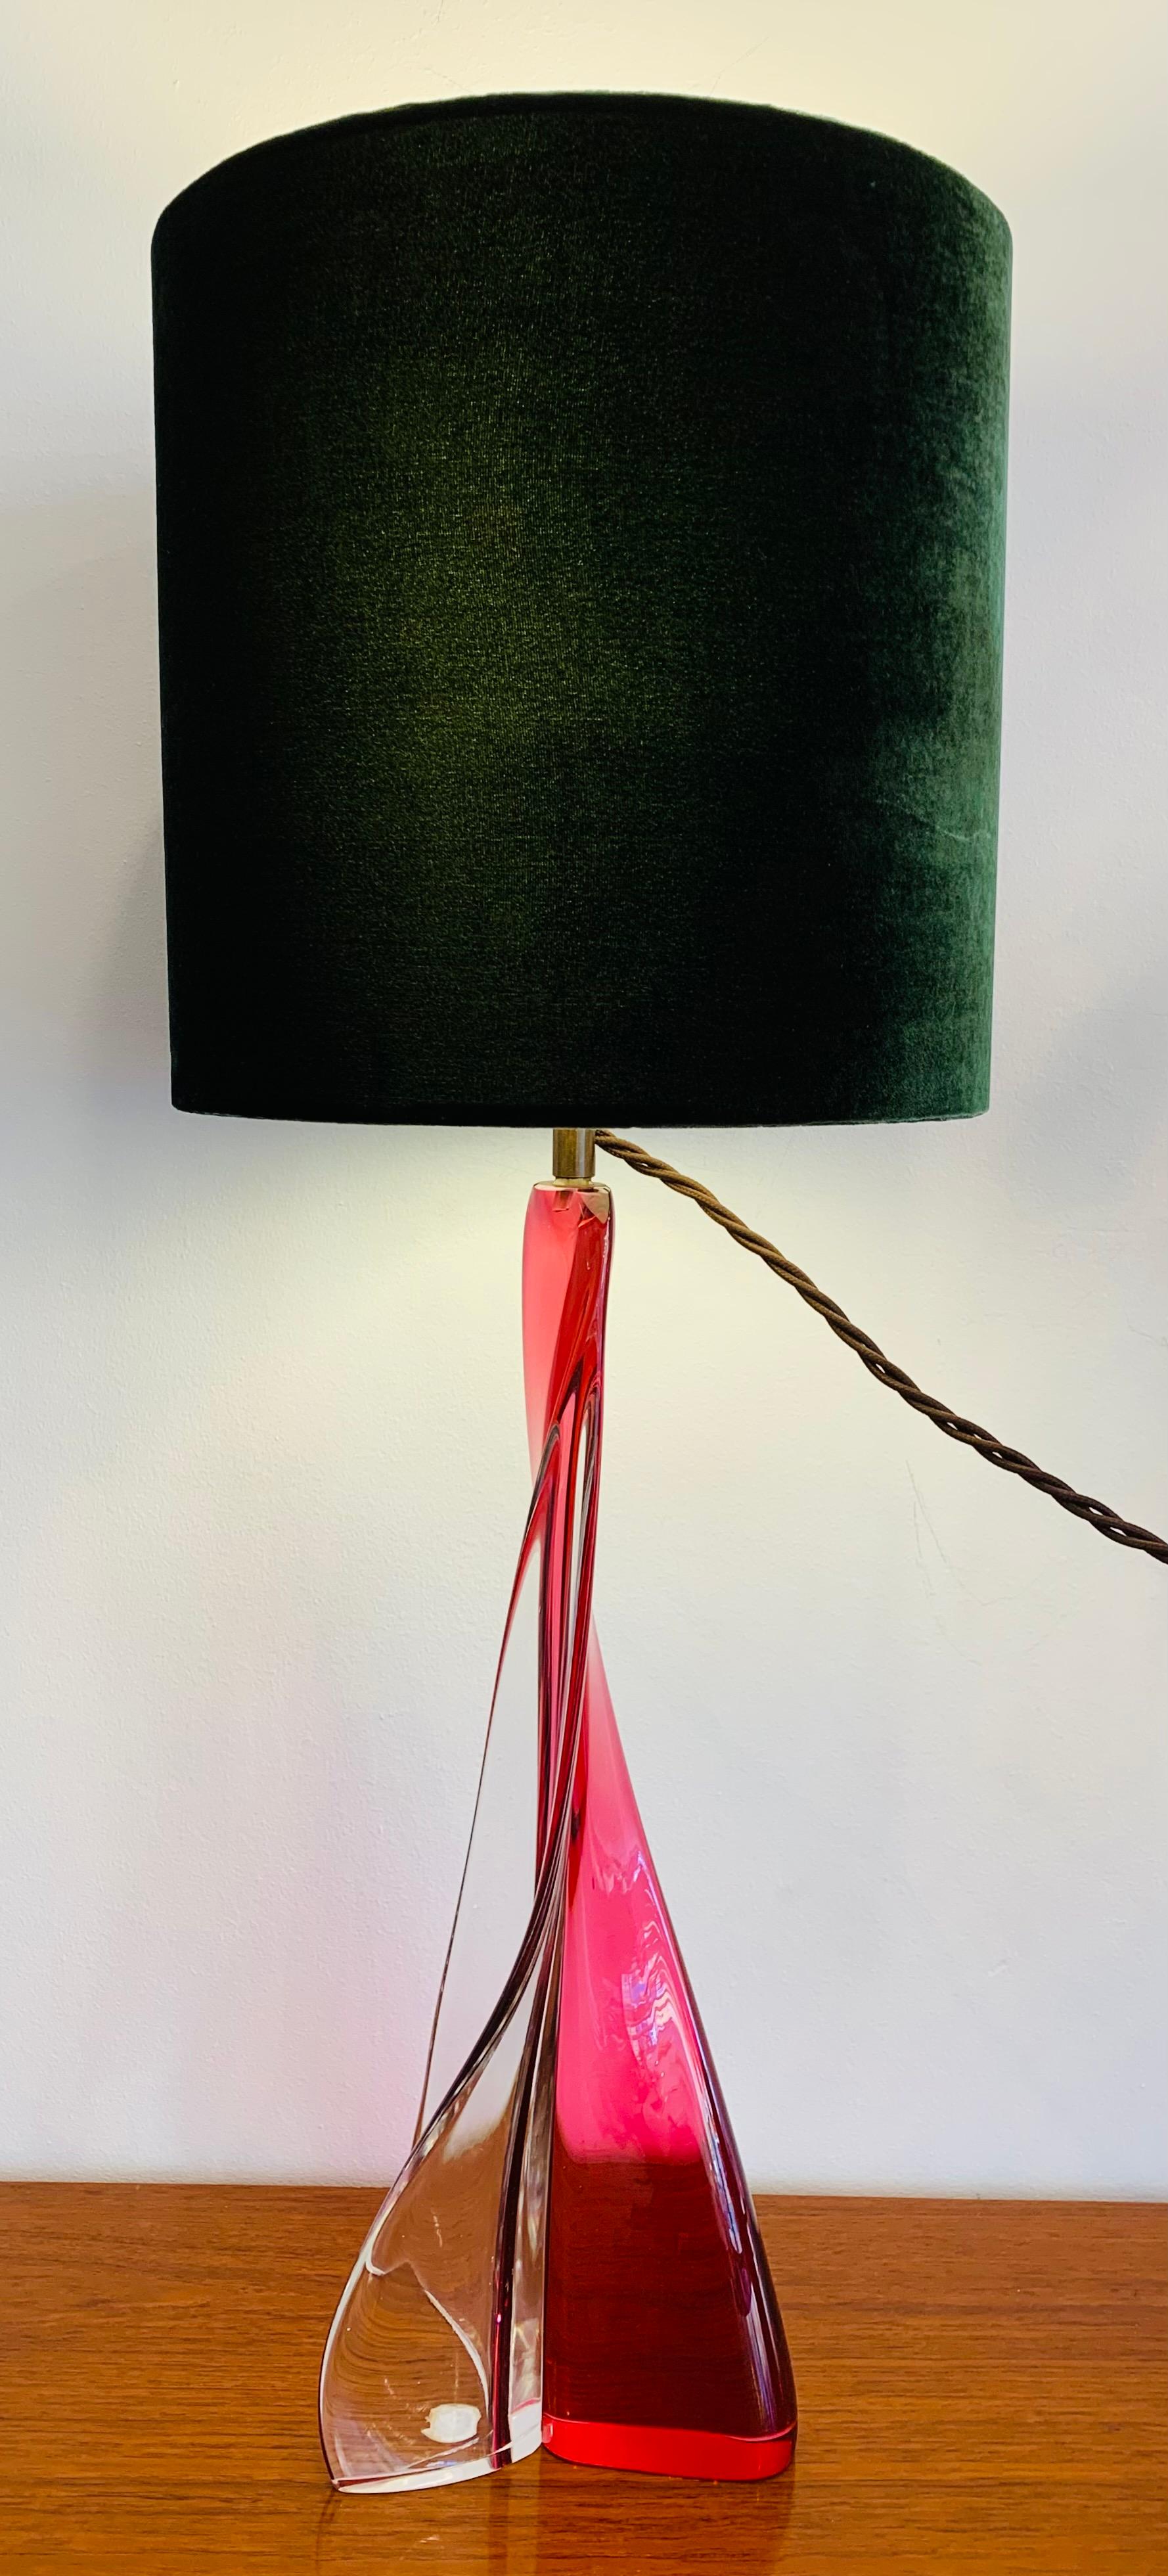 An unusual design and construction by Belgium glassmaker Val St Lambert from a single piece of clear glass shaped in a crescent moon with a thicker piece of pink glass fused to it creating a tripod base. A truly stunning and beautiful lamp with a